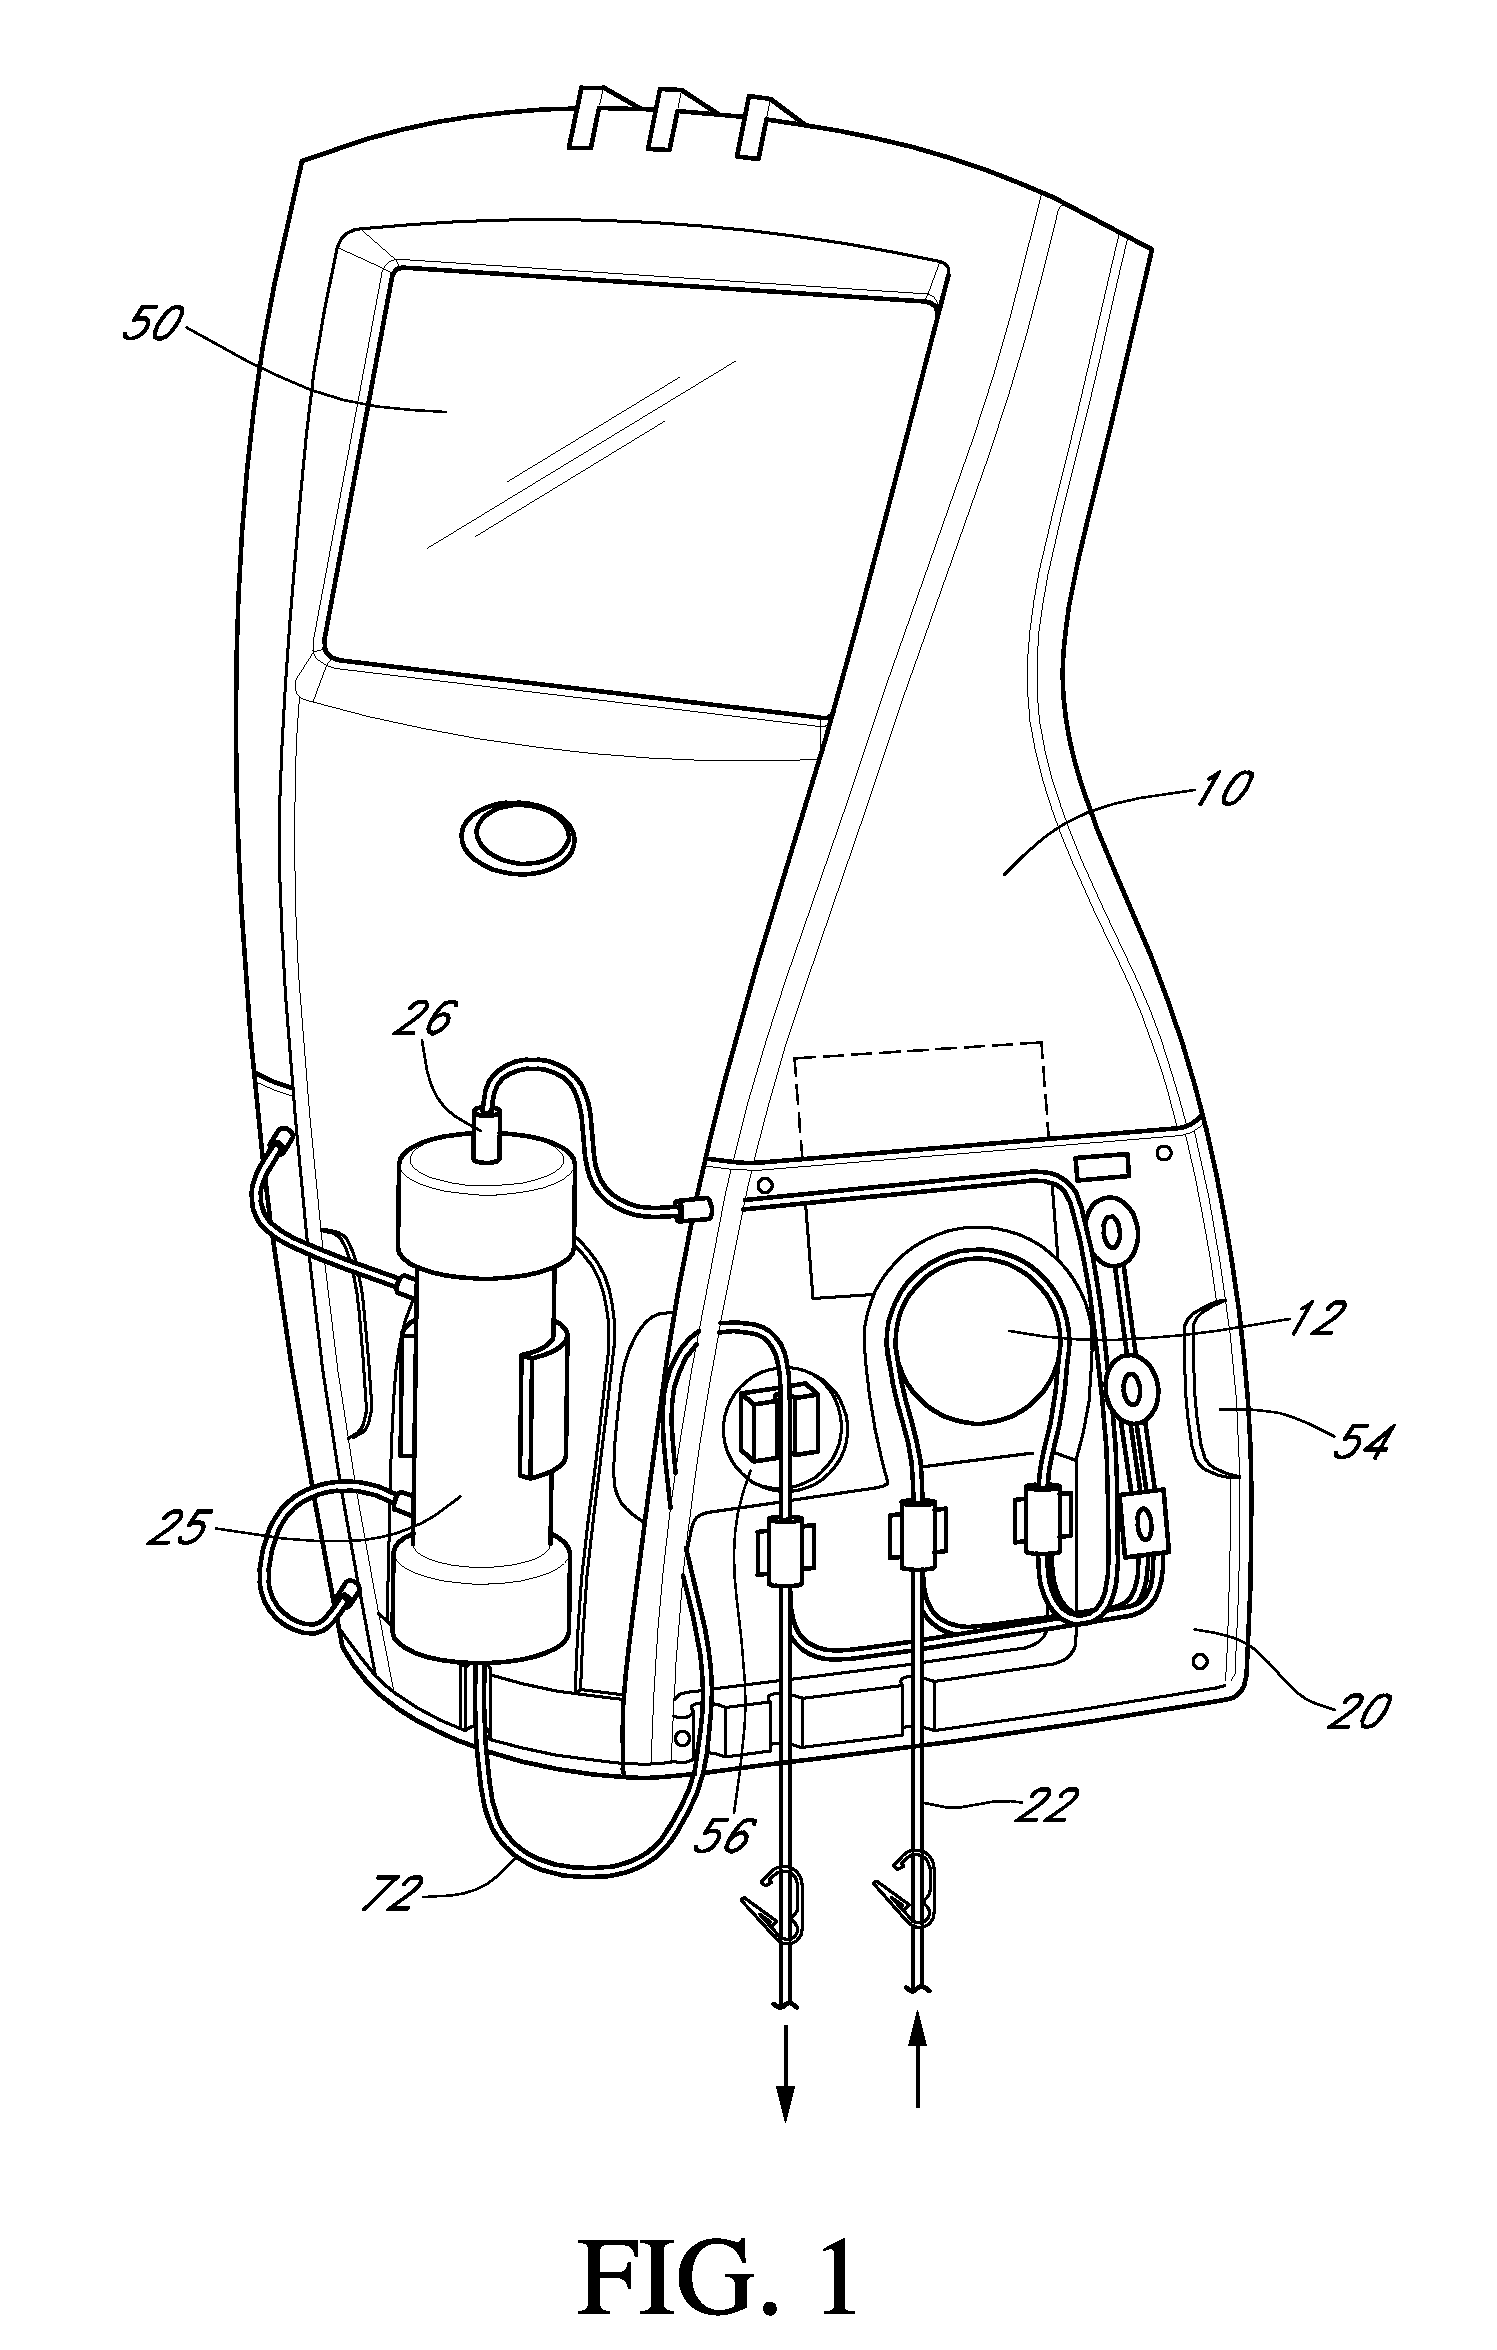 Modular hemofiltration apparatus with removable panels for multiple and alternate blood therapy